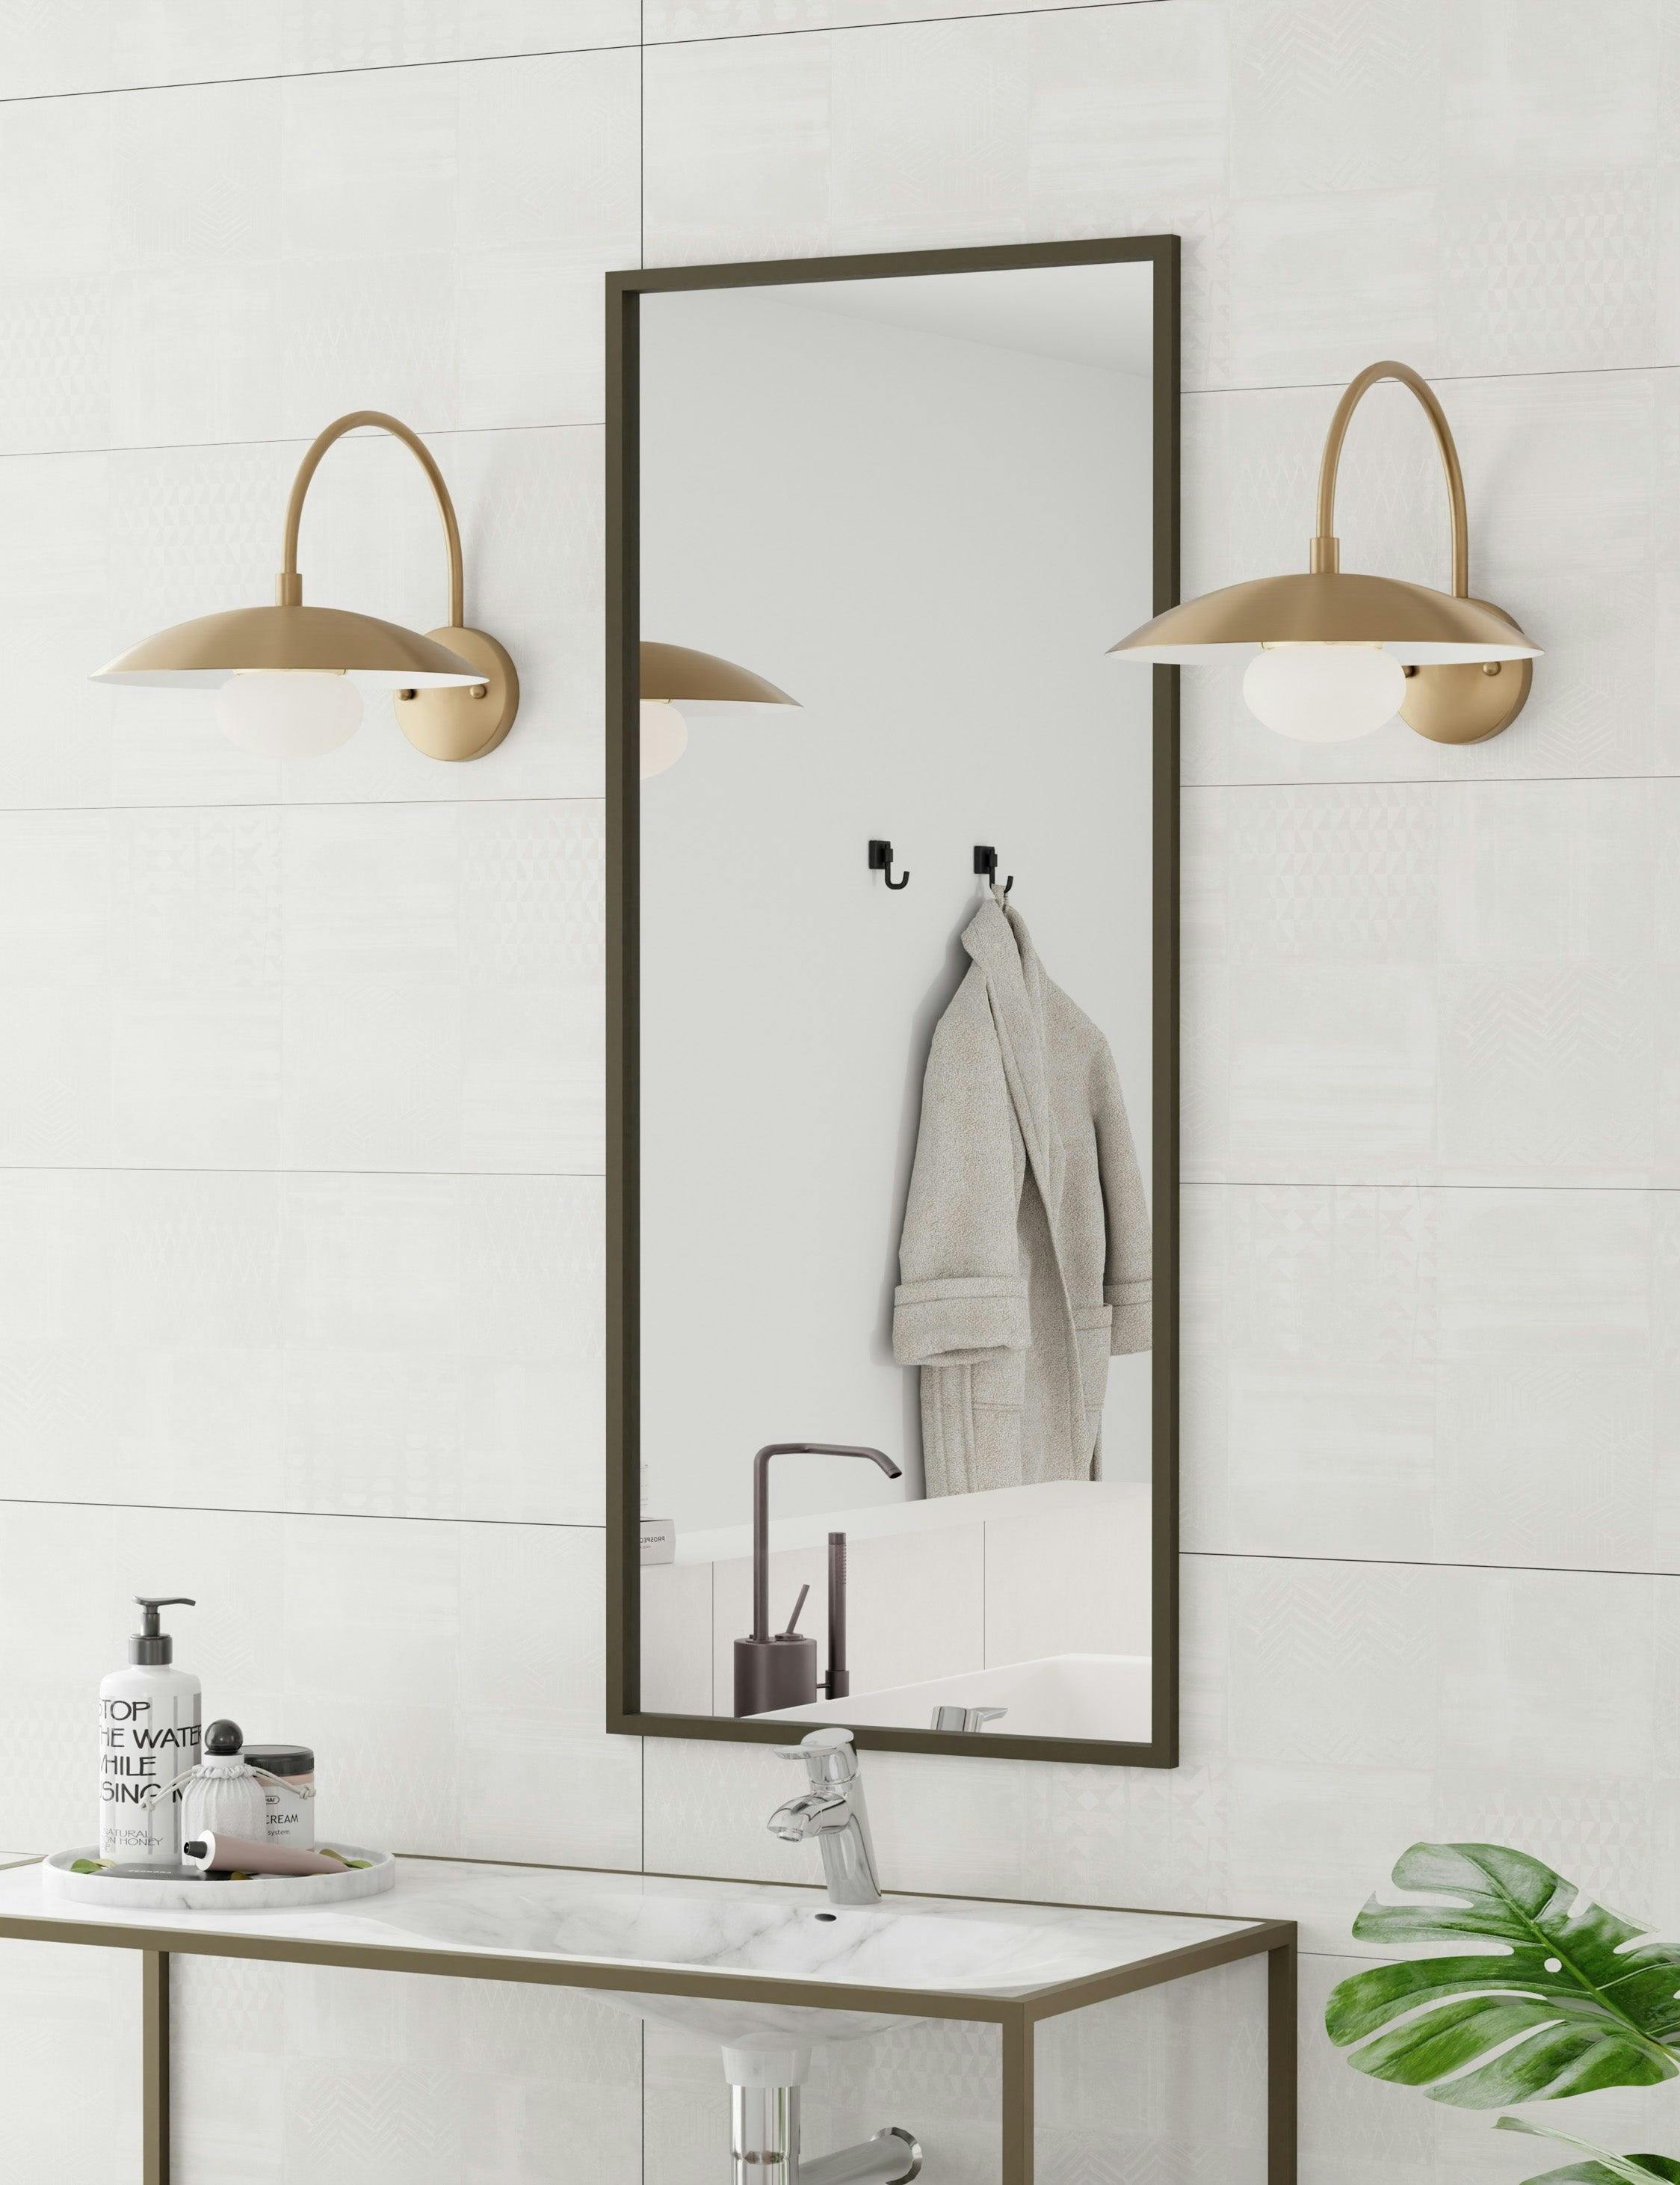 Modern Brass Curved Arm Sconce with Frosted Glass Globe